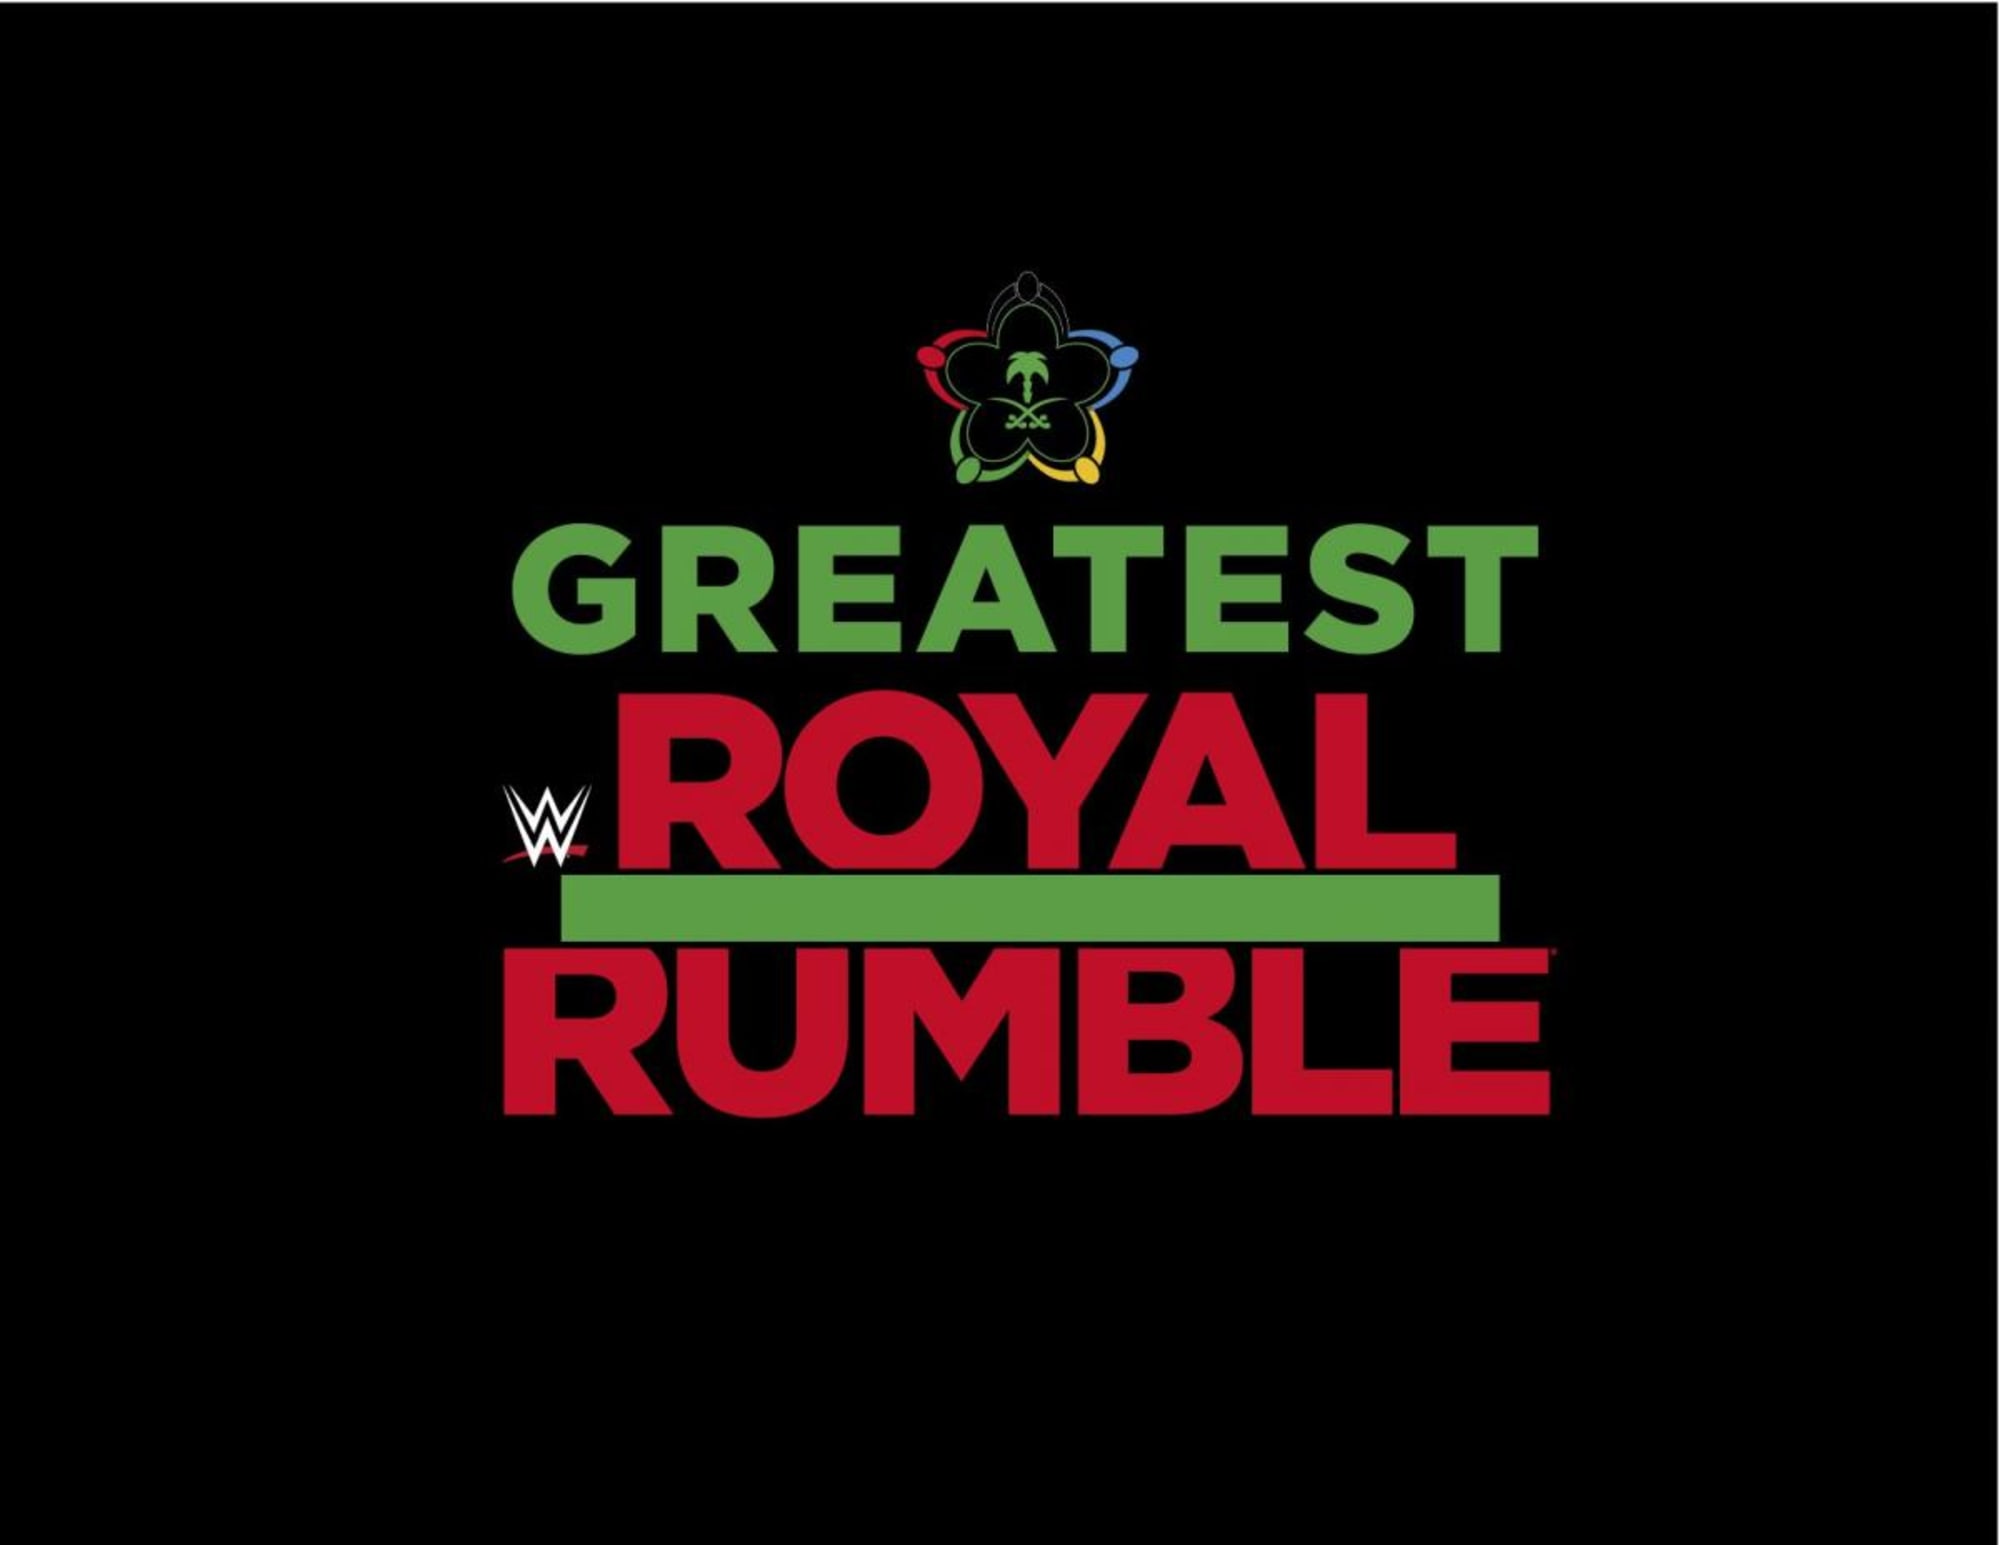 WWE Greatest Royal Rumble Live stream, start time, match card